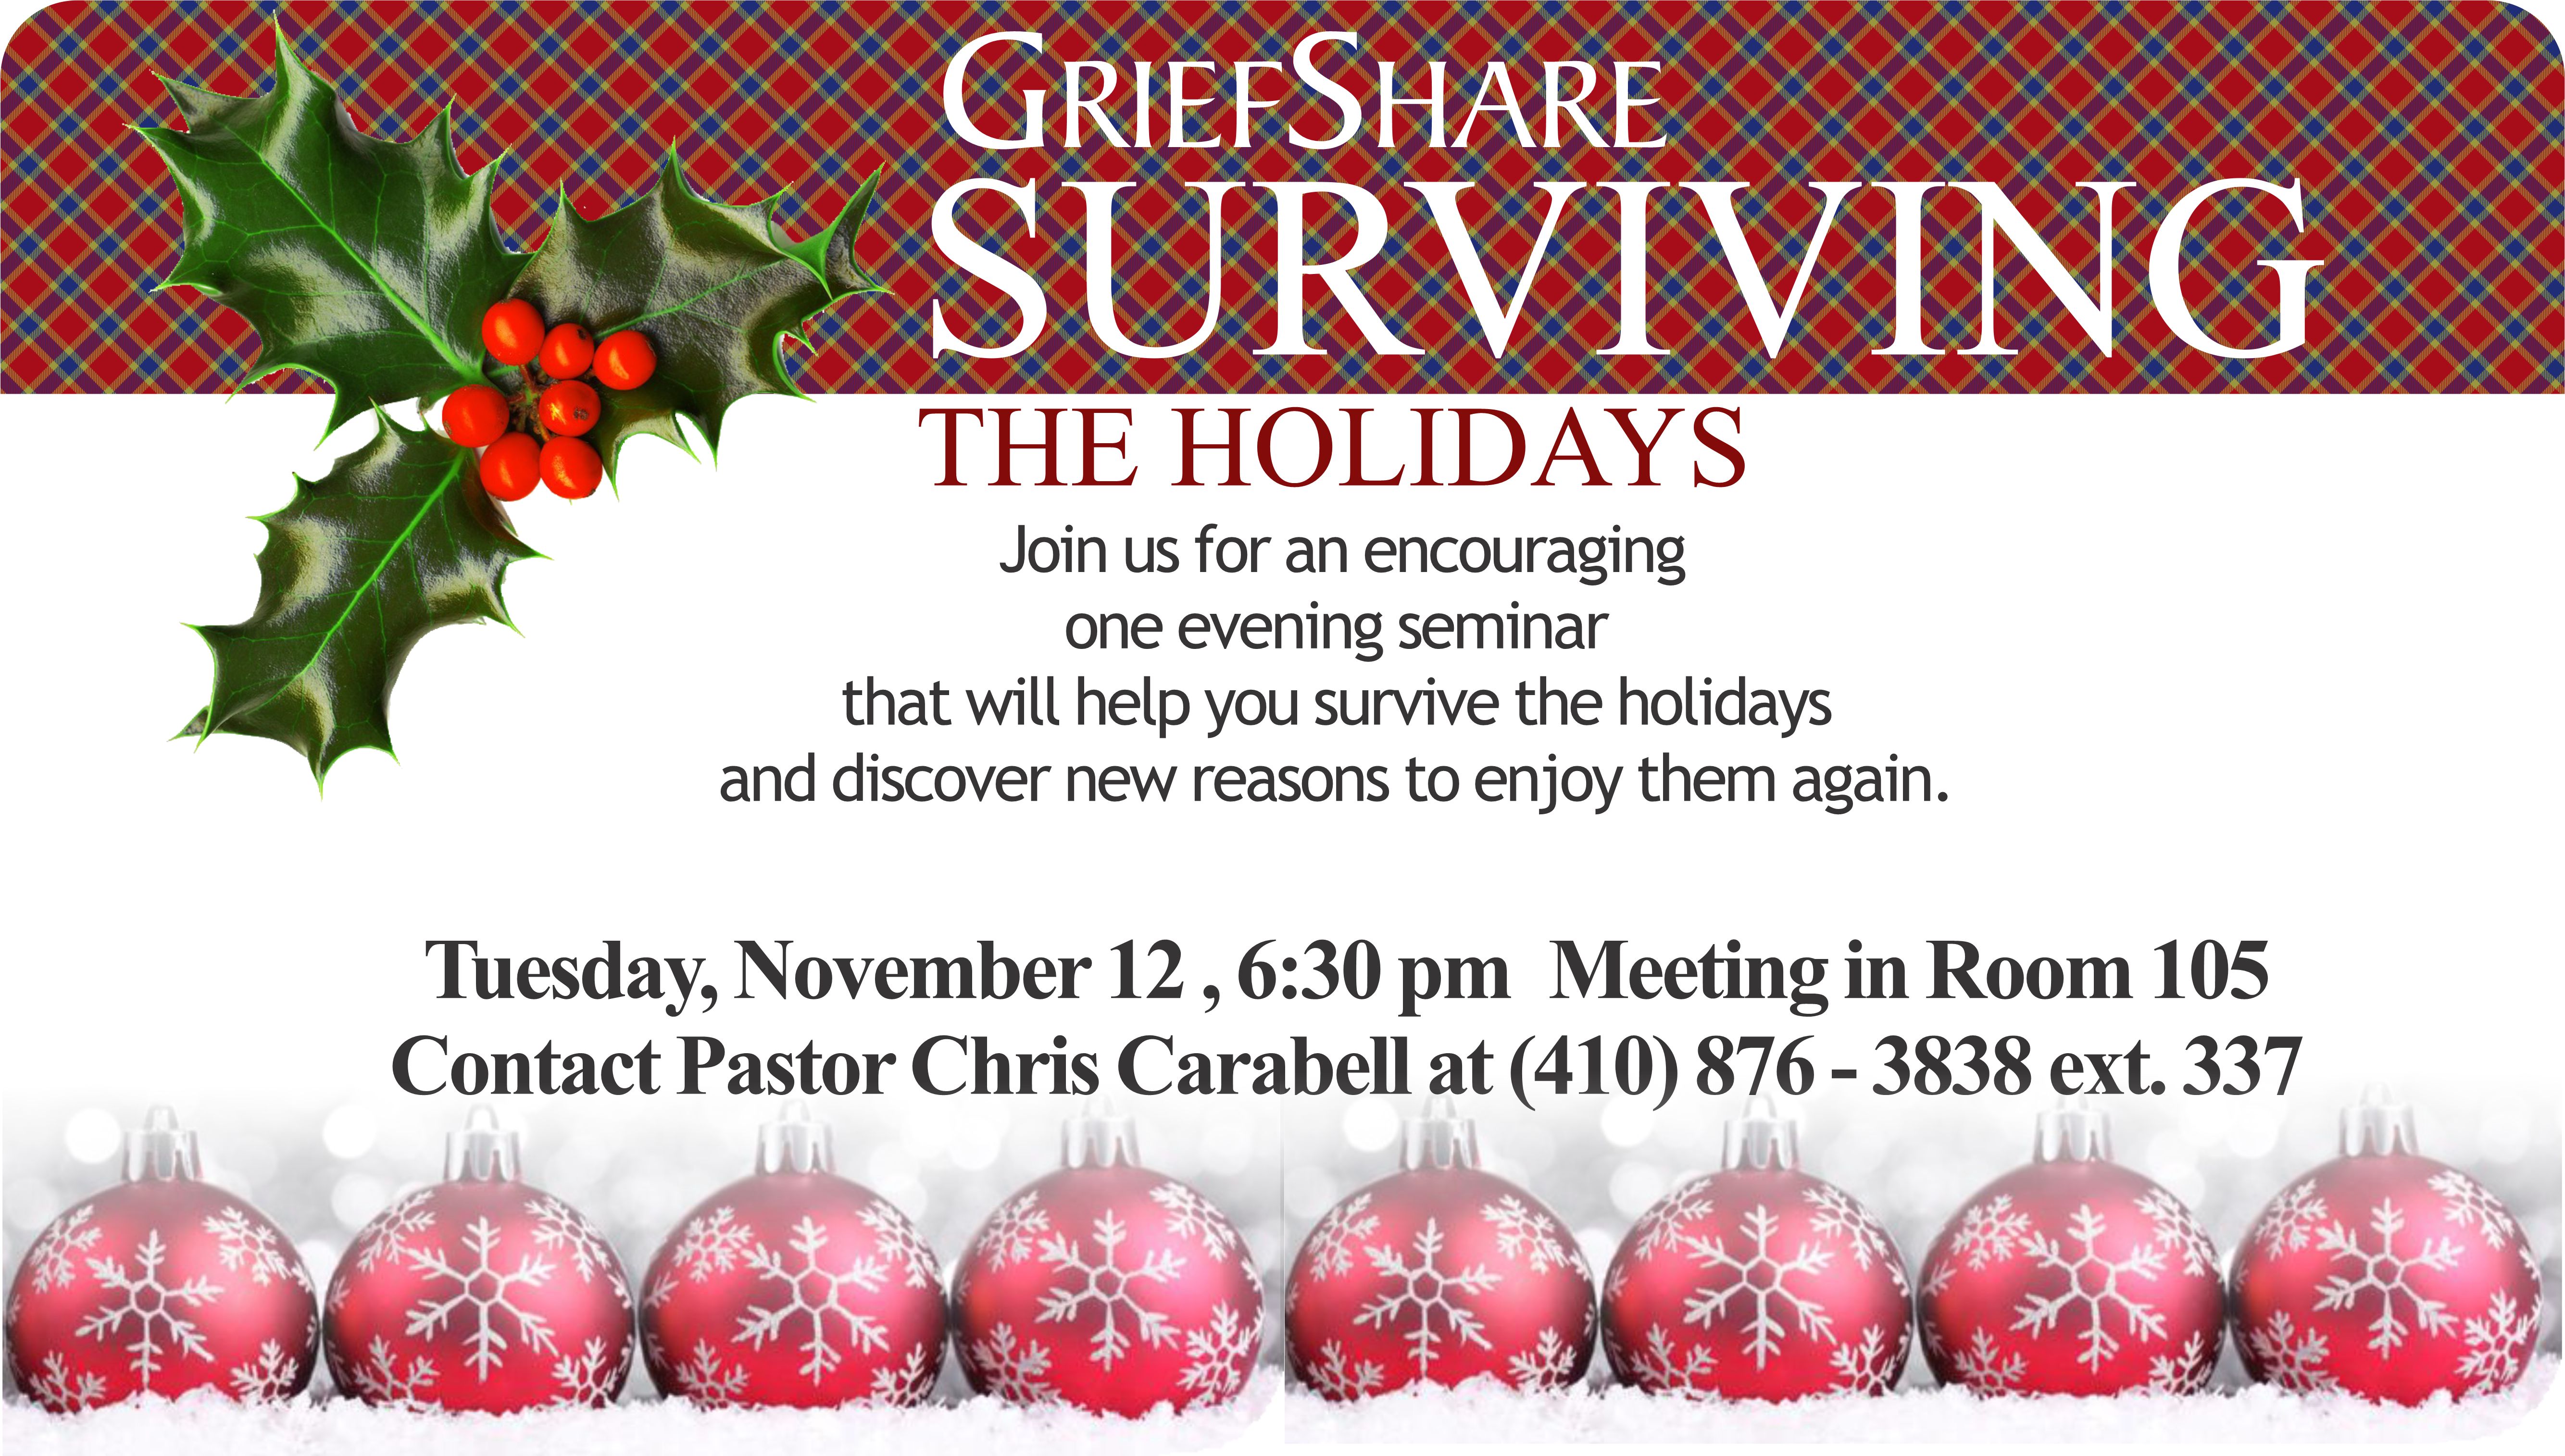 Grief Share Surviving The Holidays